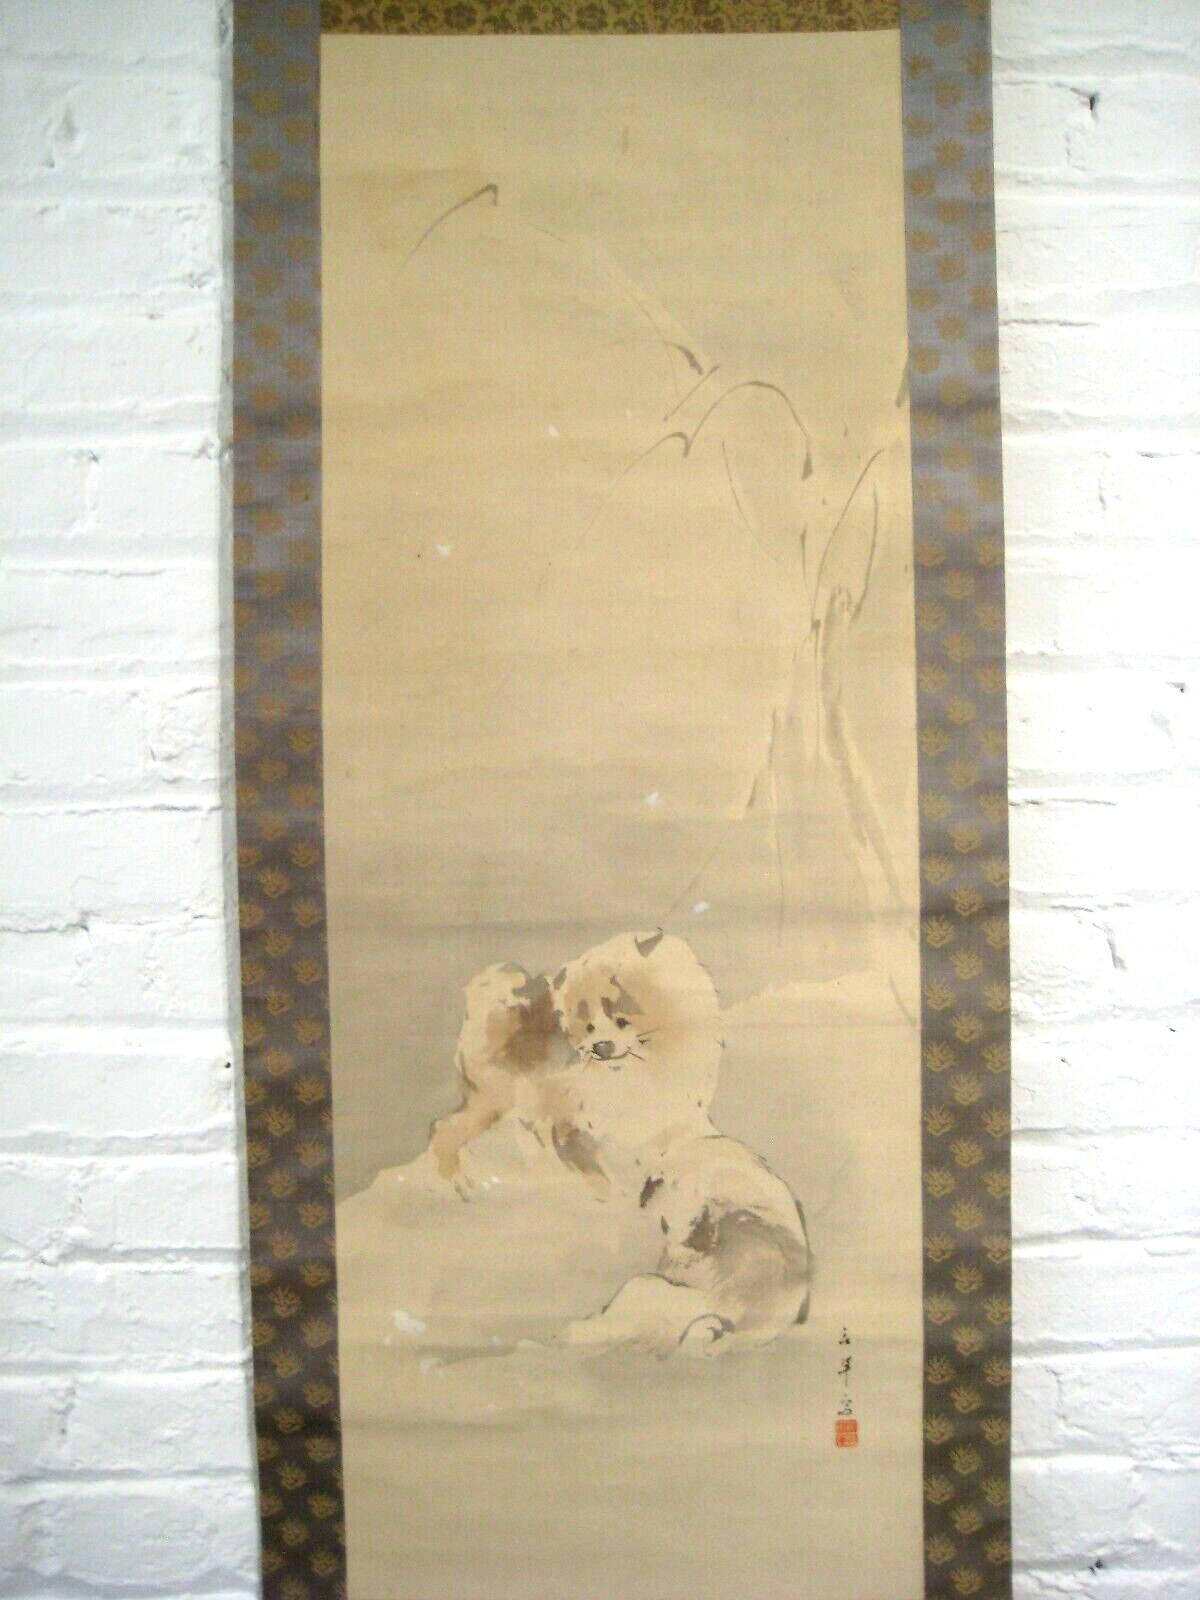 Vintage Japanese Scroll Two Fuzzy Akita Dogs Playimg In The Snow